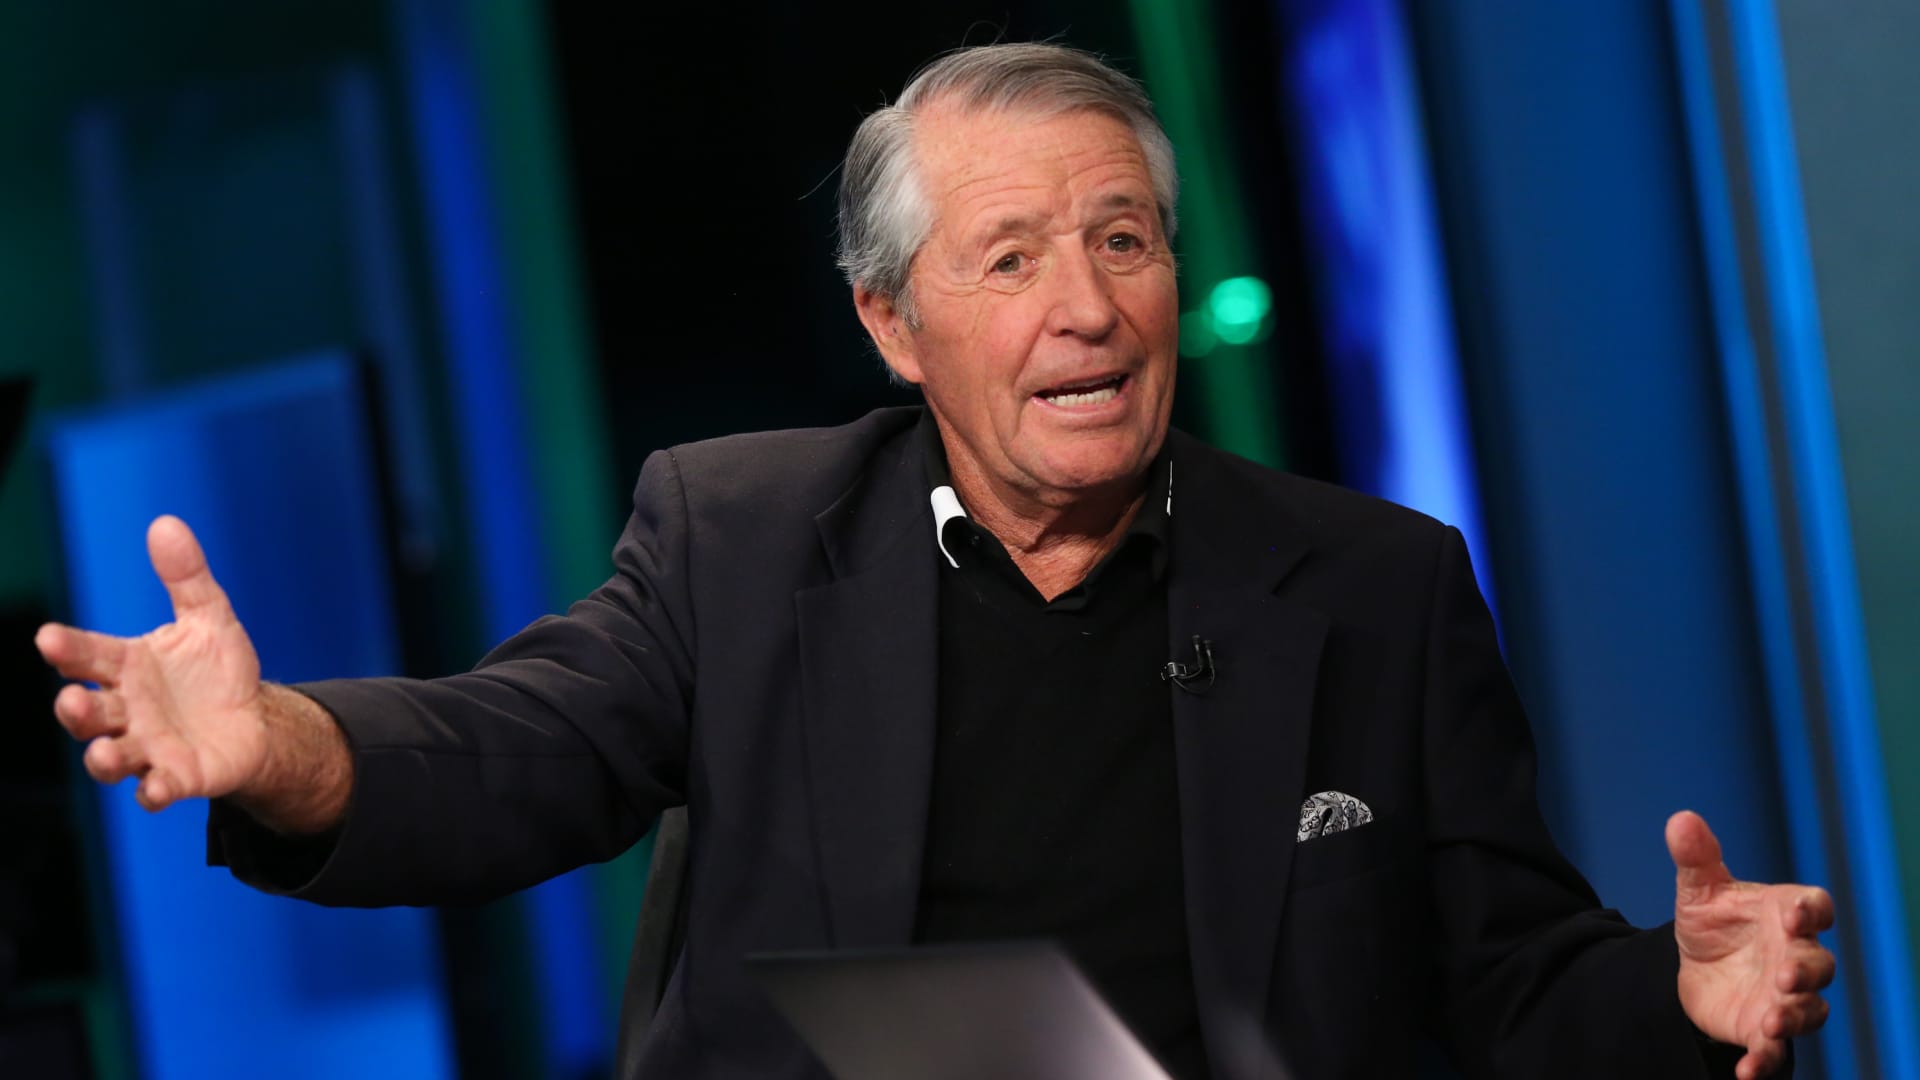 Golf legend Gary Player says government should stay out of sports